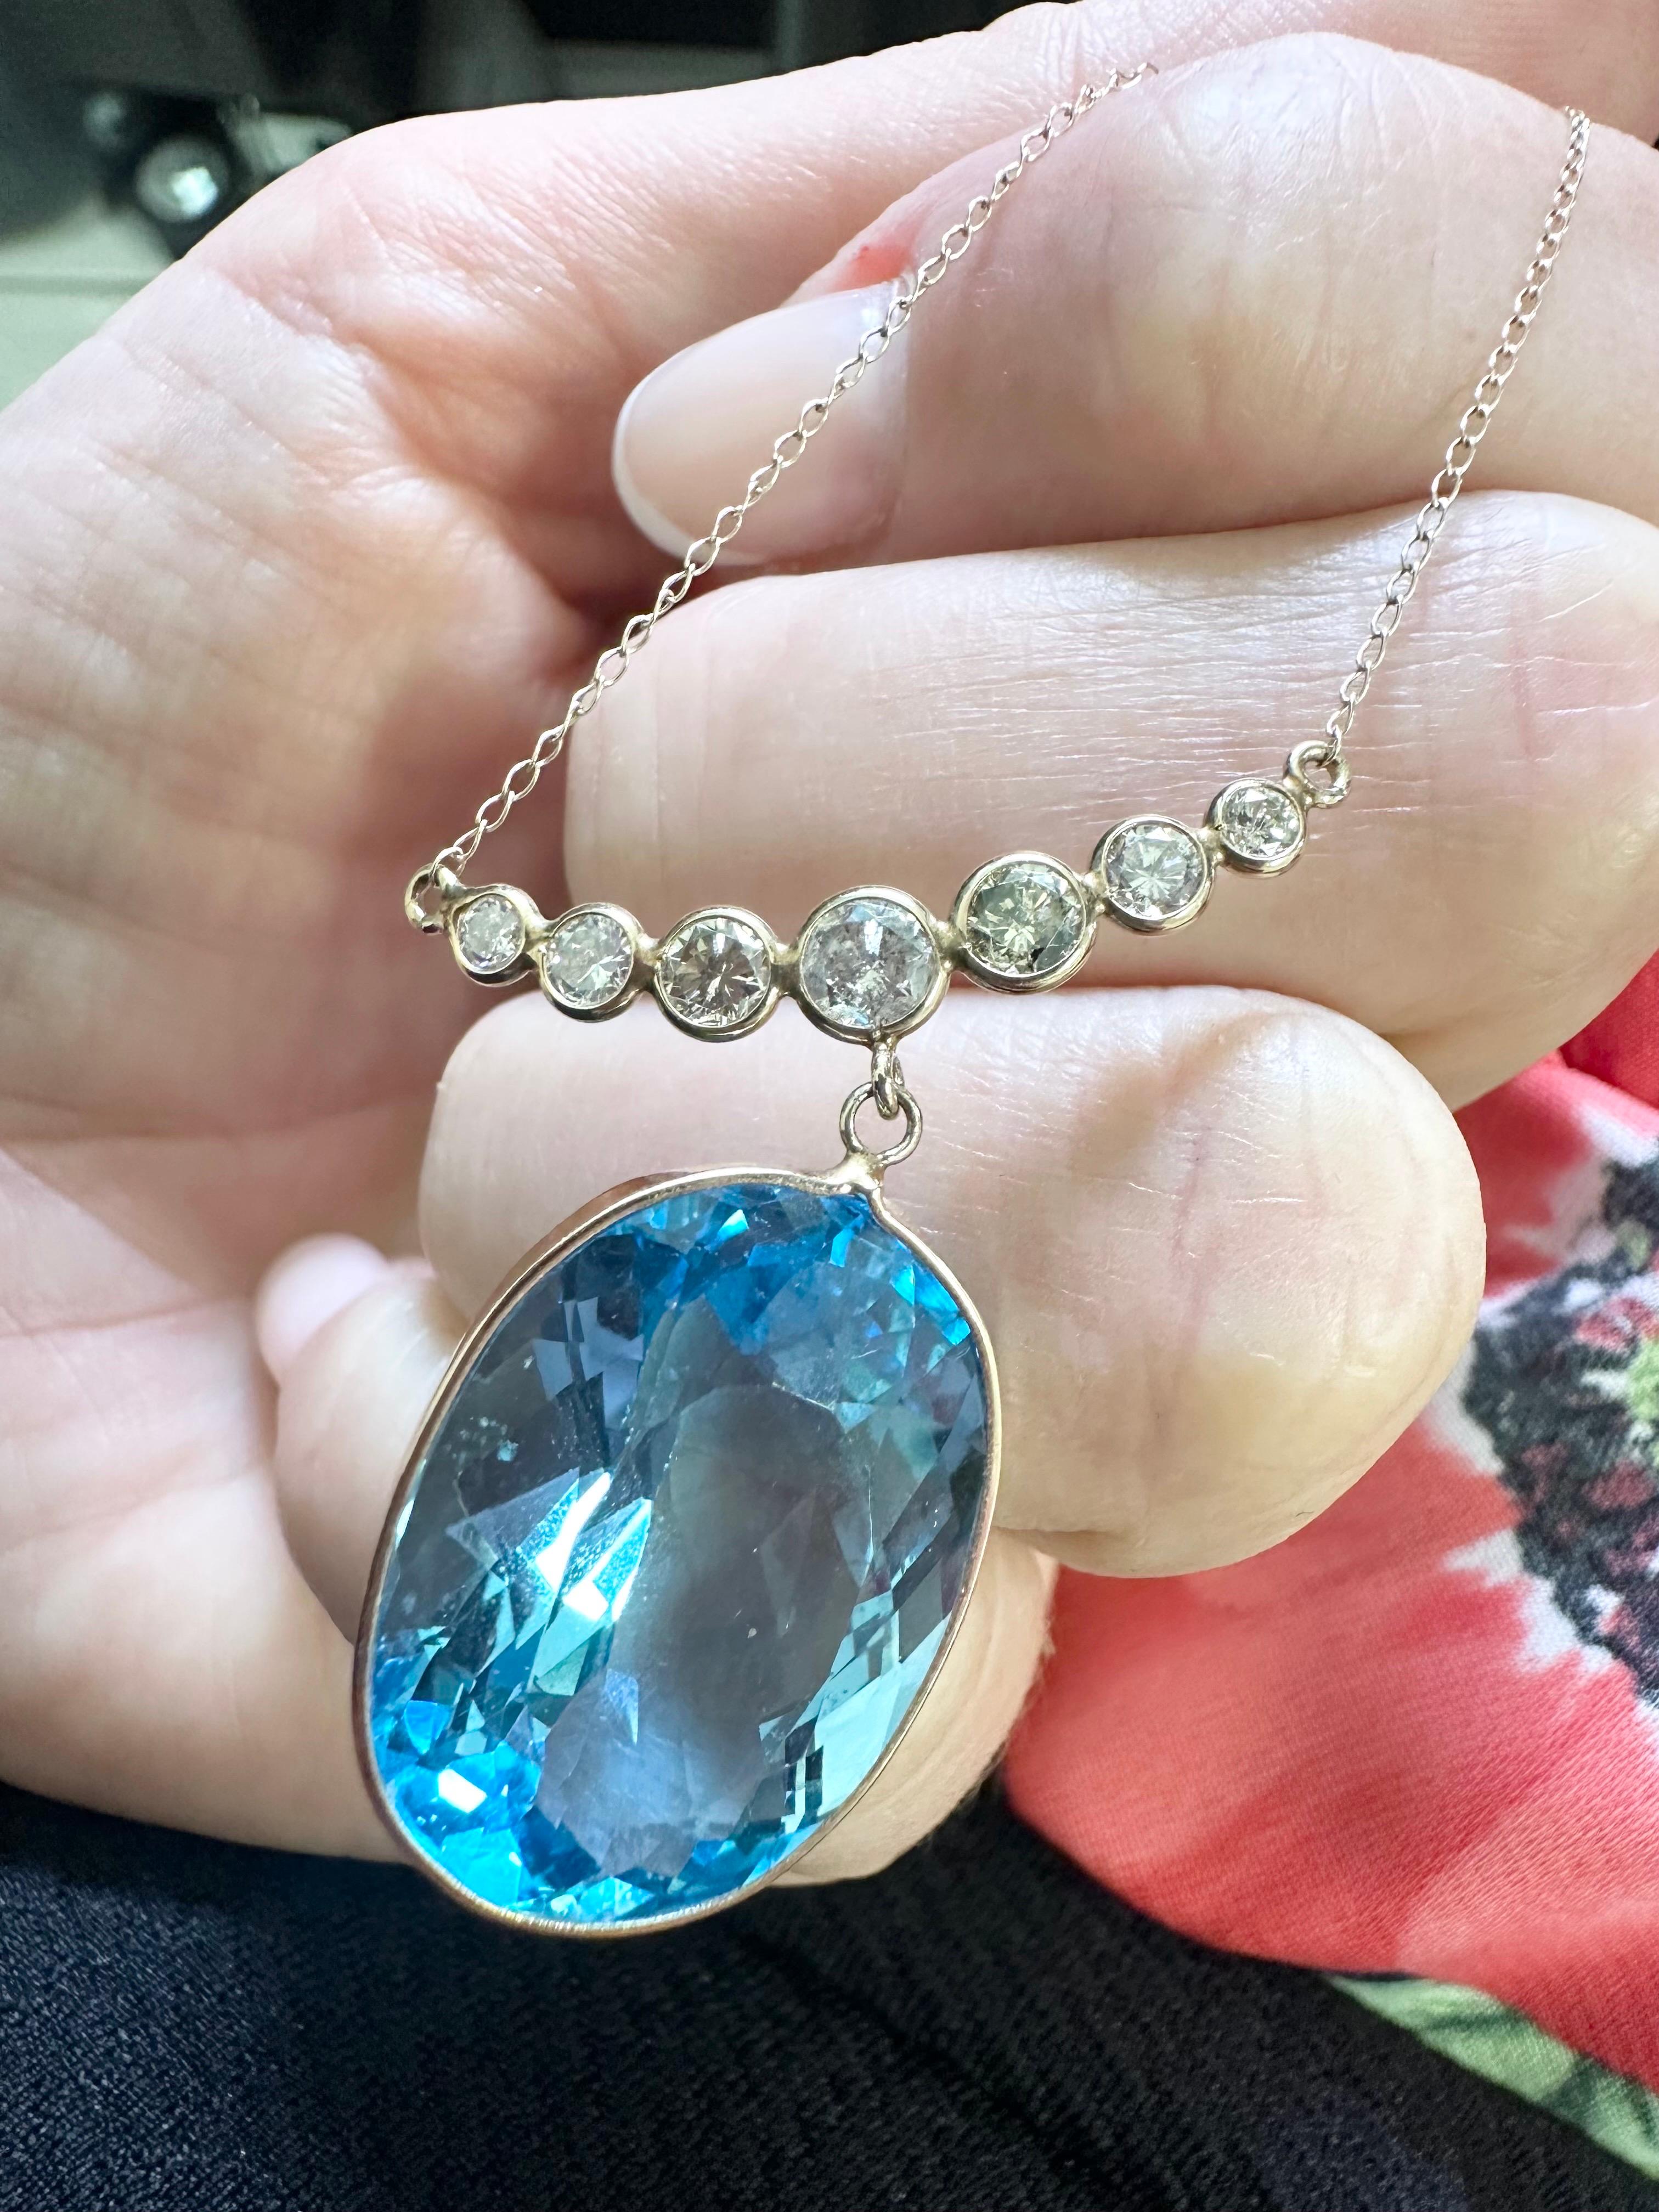 50 carats oval topaz and 1ct of champagne diamonds in this beautiful luxurious necklace made in 10KT yellow gold, ready to ship in 1 day!! 

Details:
Metal: 10kt yellow gold 
Gemstone weight: 50ct
Gemstone shape: Oval 
Gemstone clarity: Very